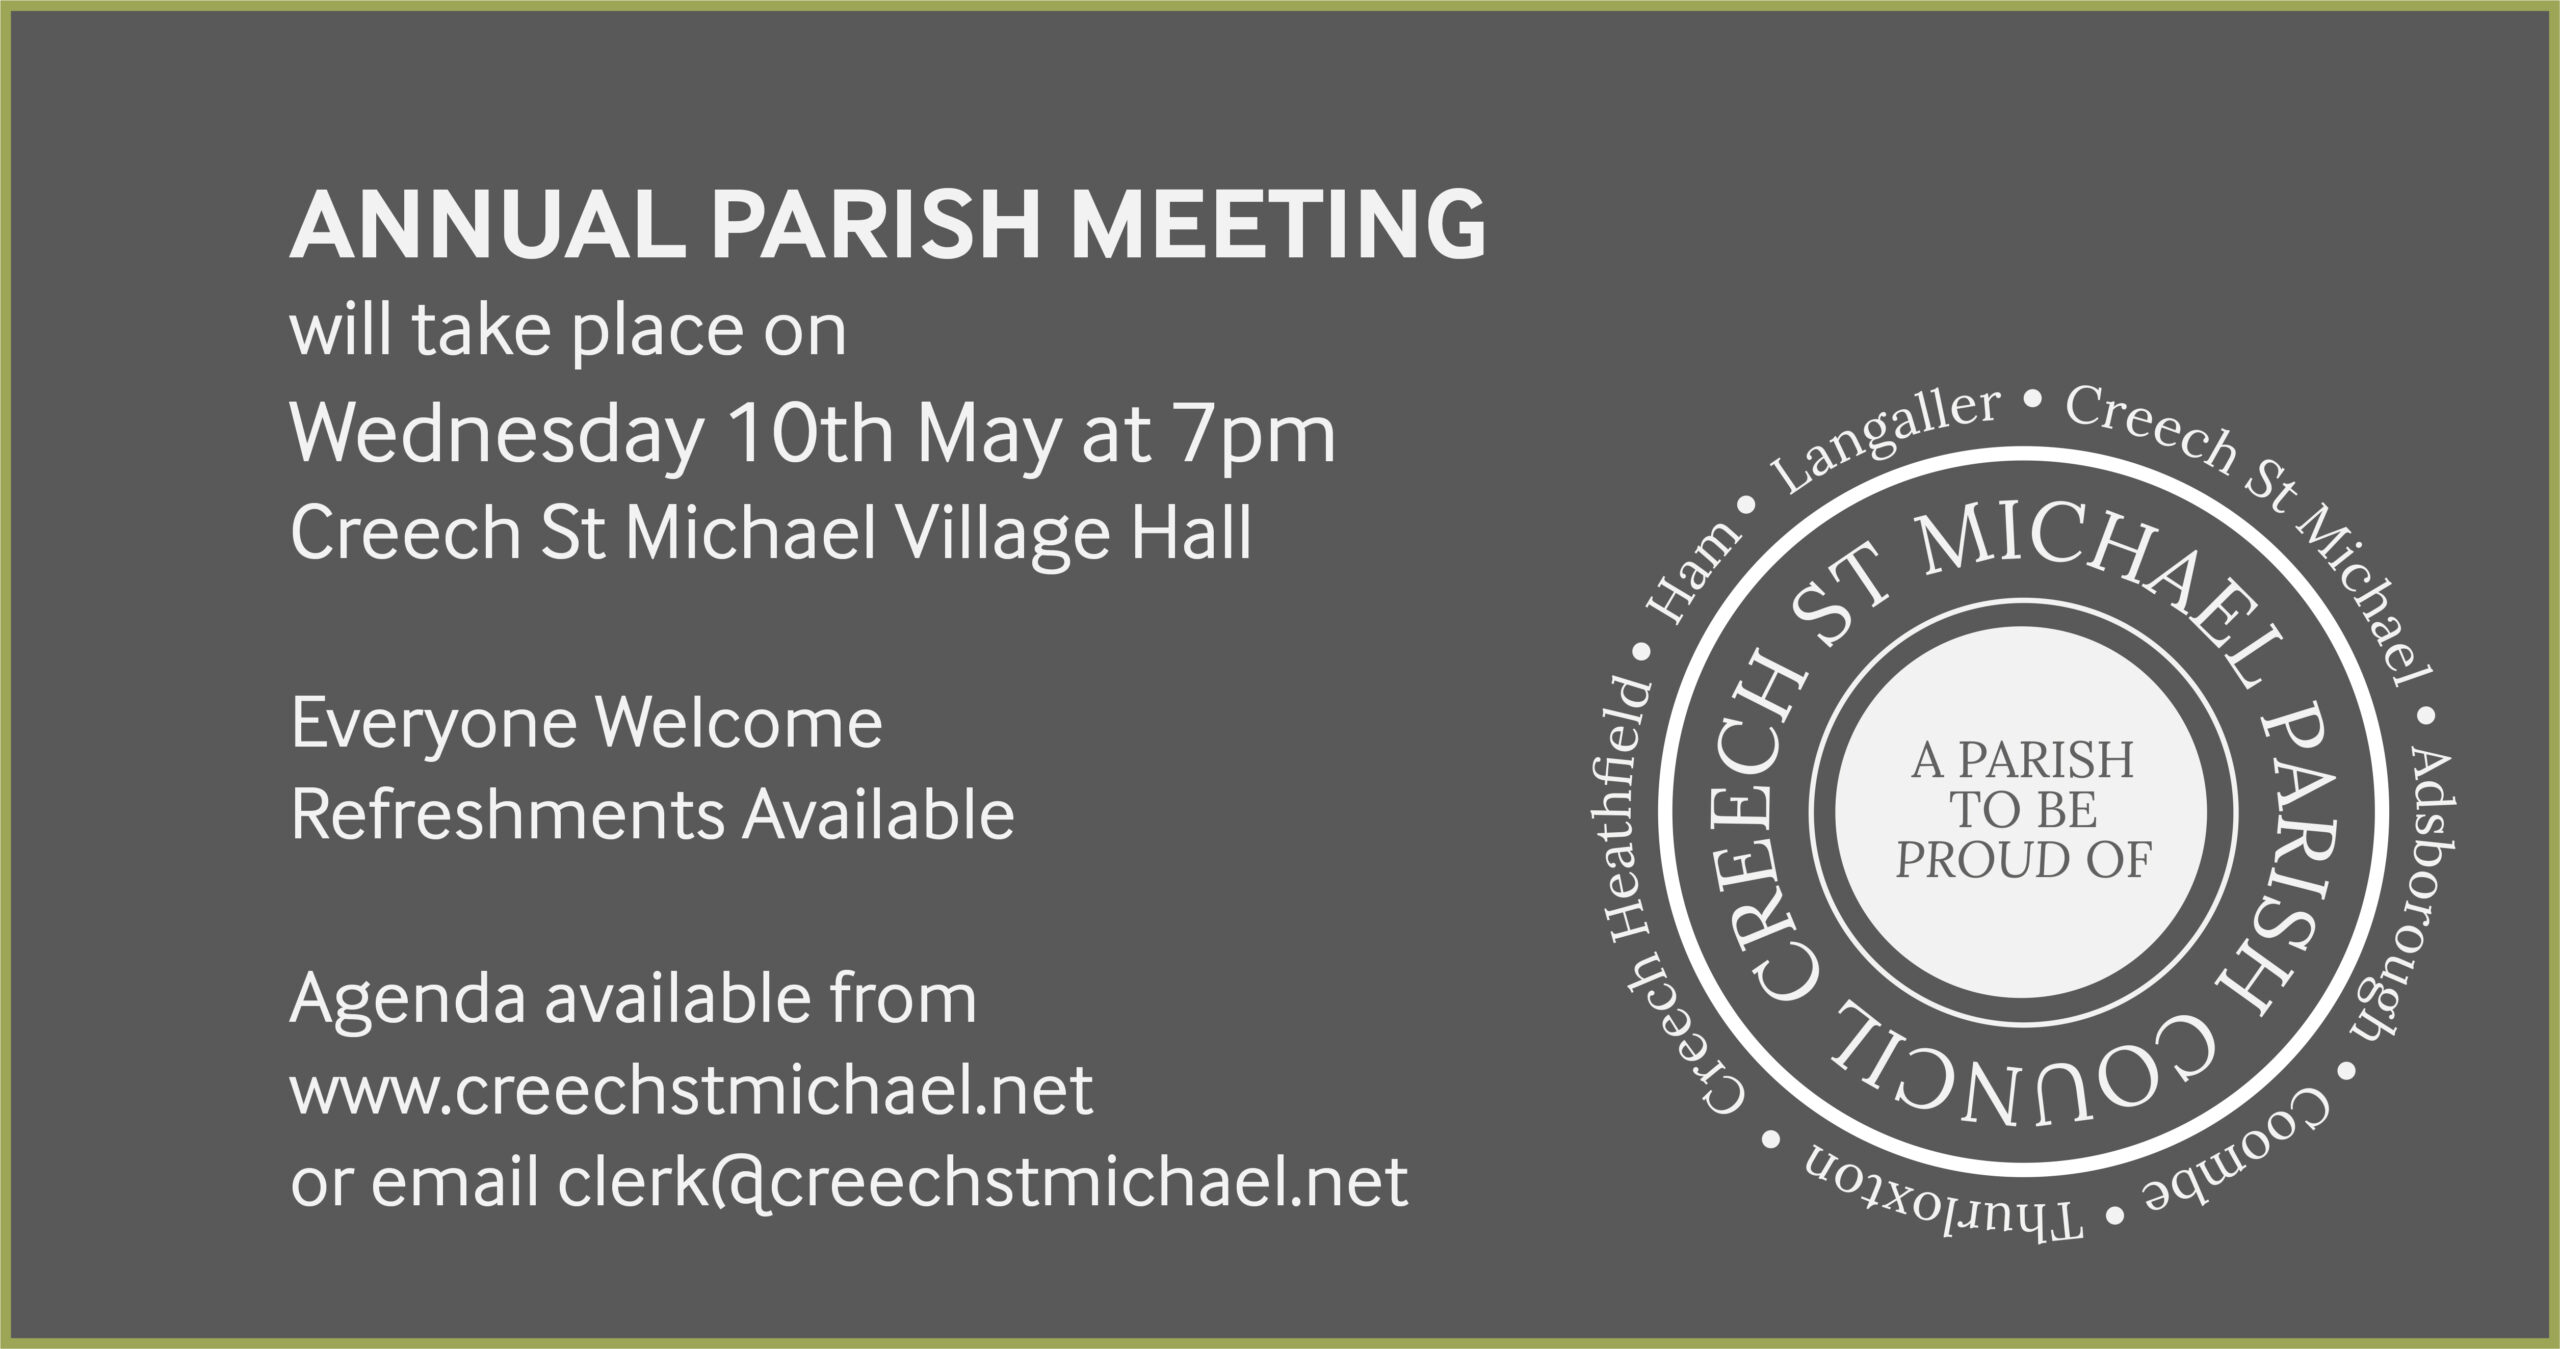 Notification of the Annual Parish Meeting